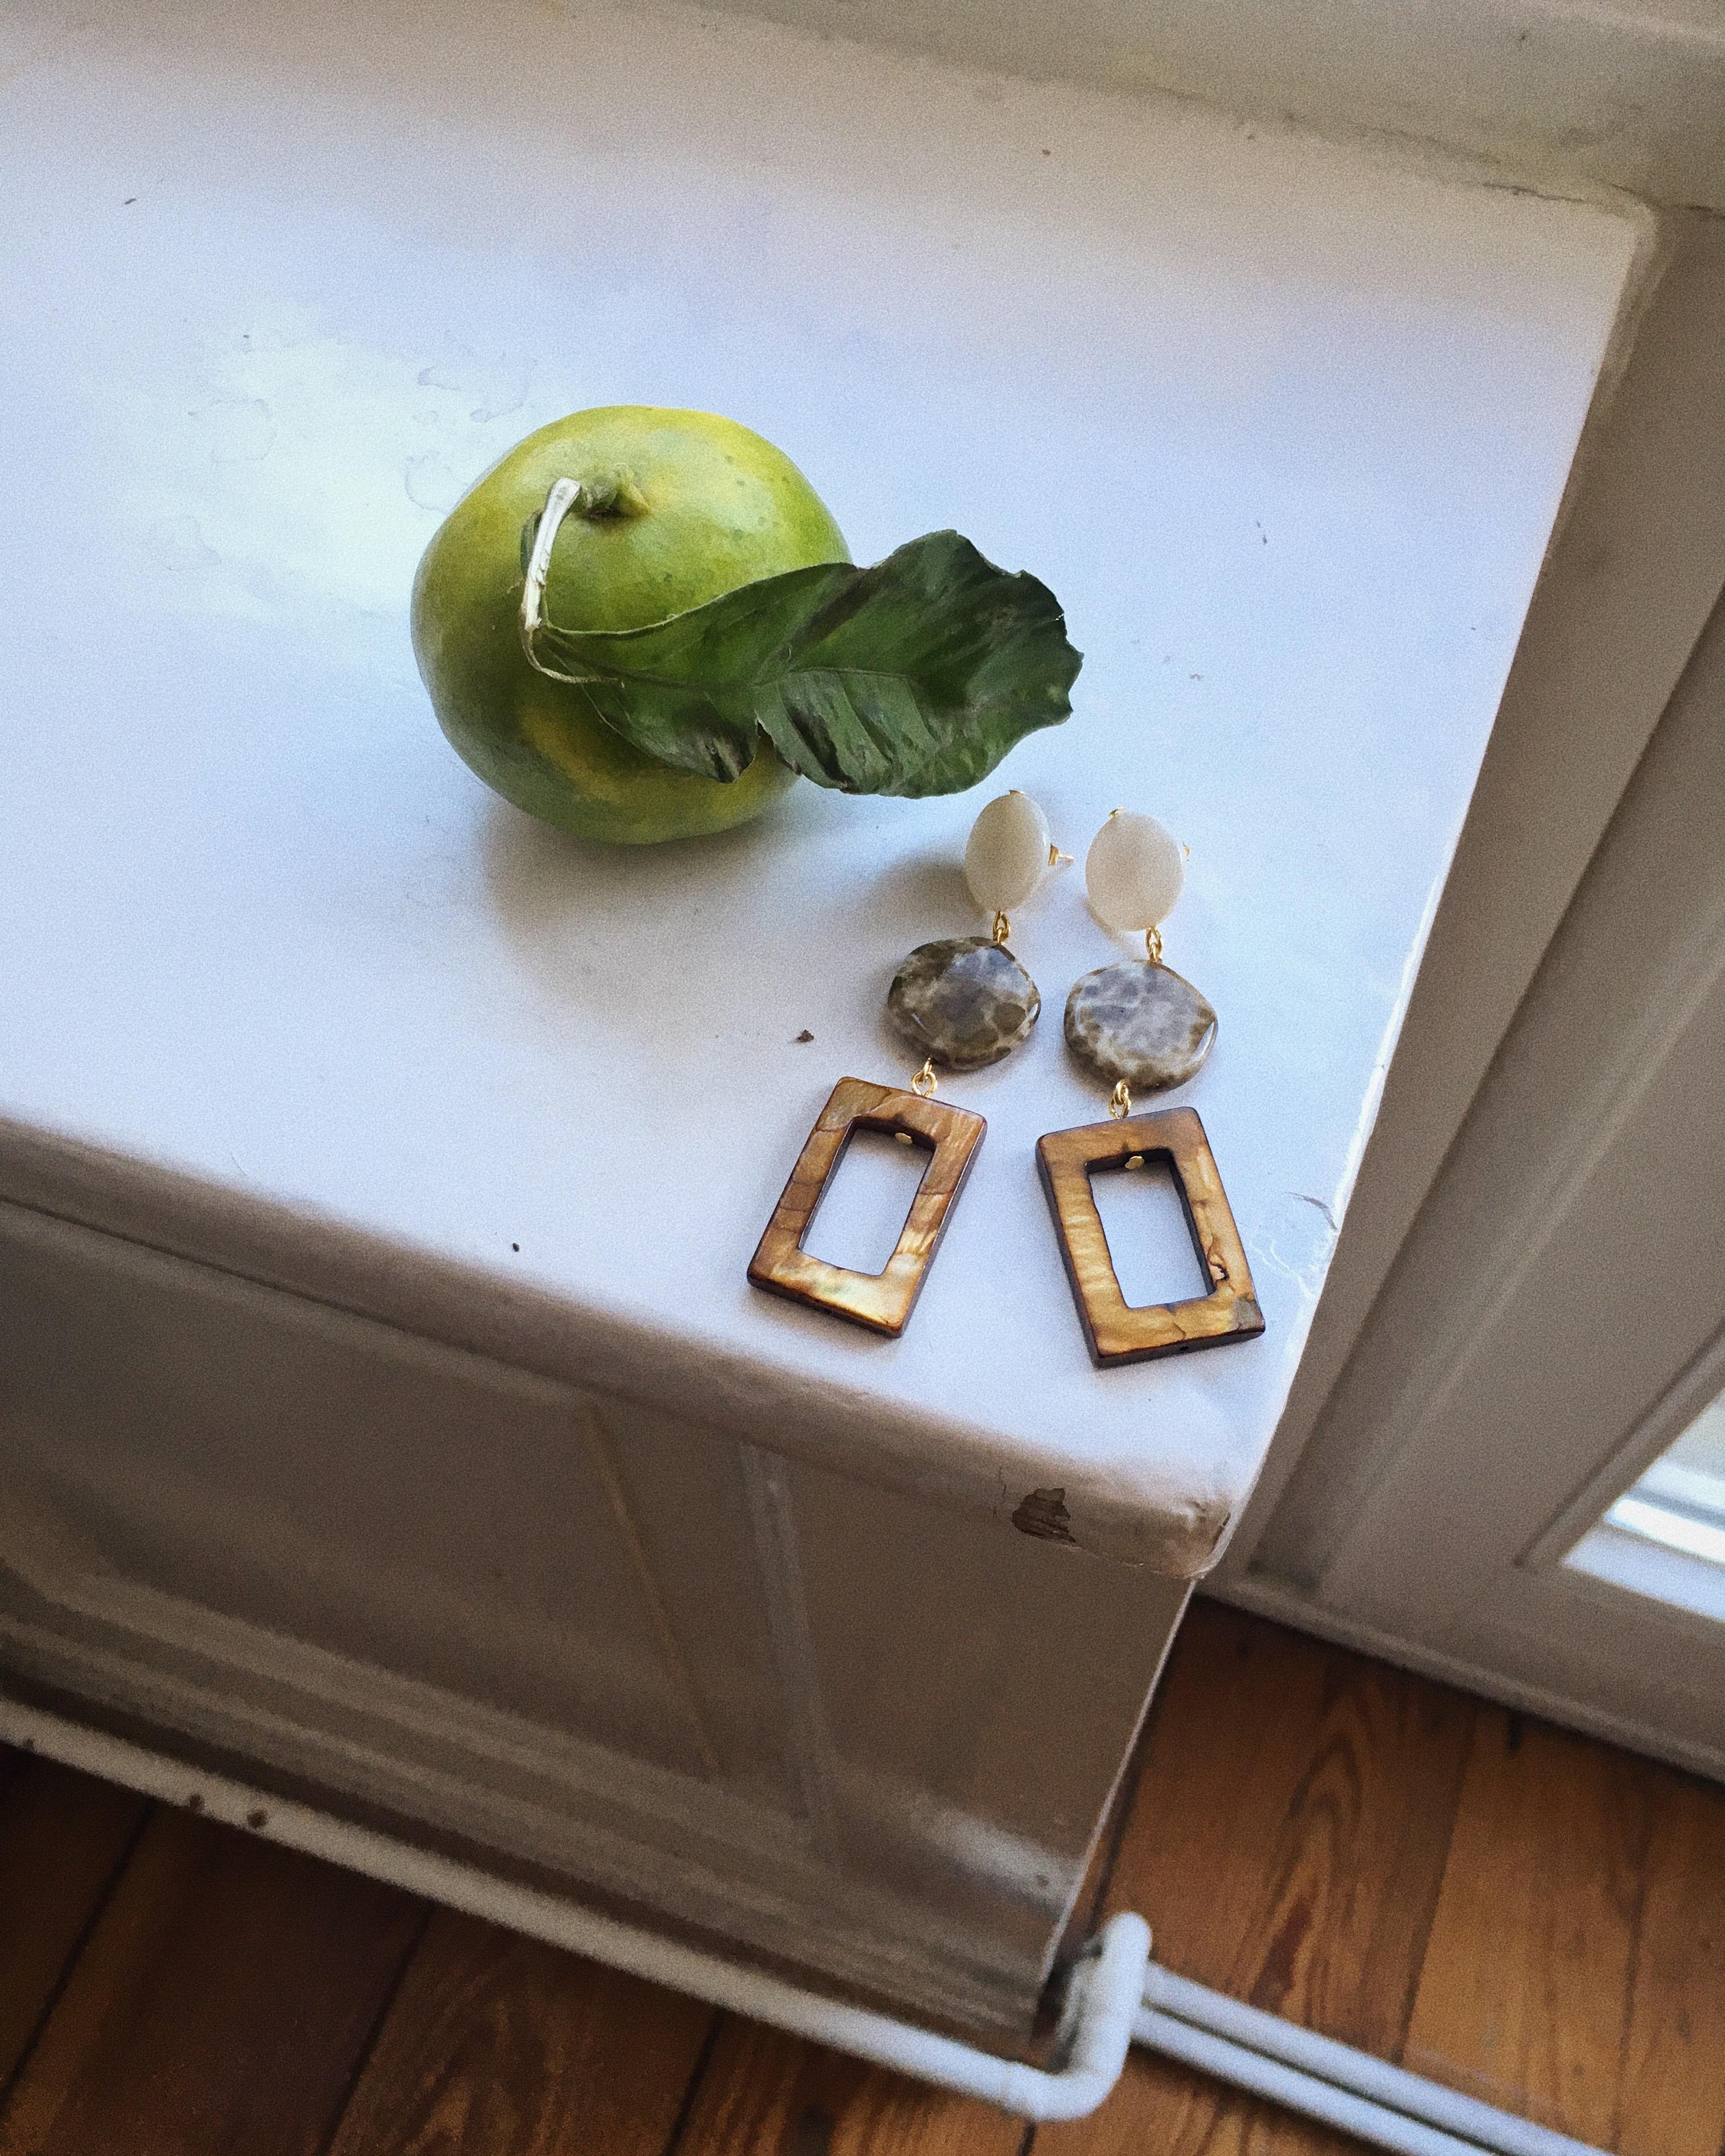 Of fruits and little things #jewelry #athome ##interieur #inspiration